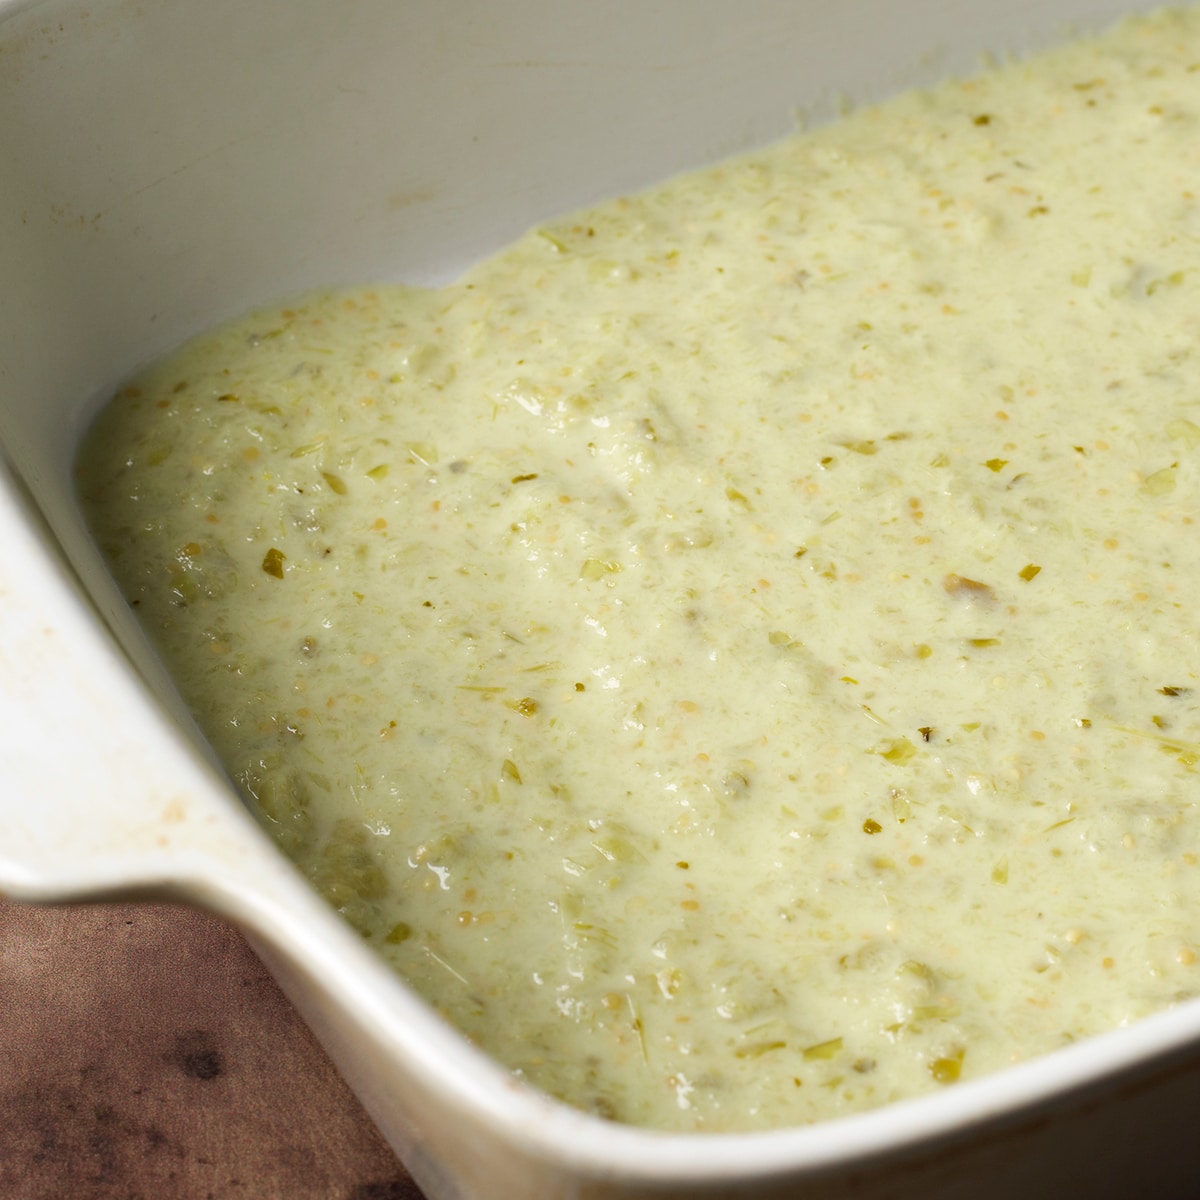 About a half cup of creamy enchiladas verdes sauce spread across the bottom of a baking dish.